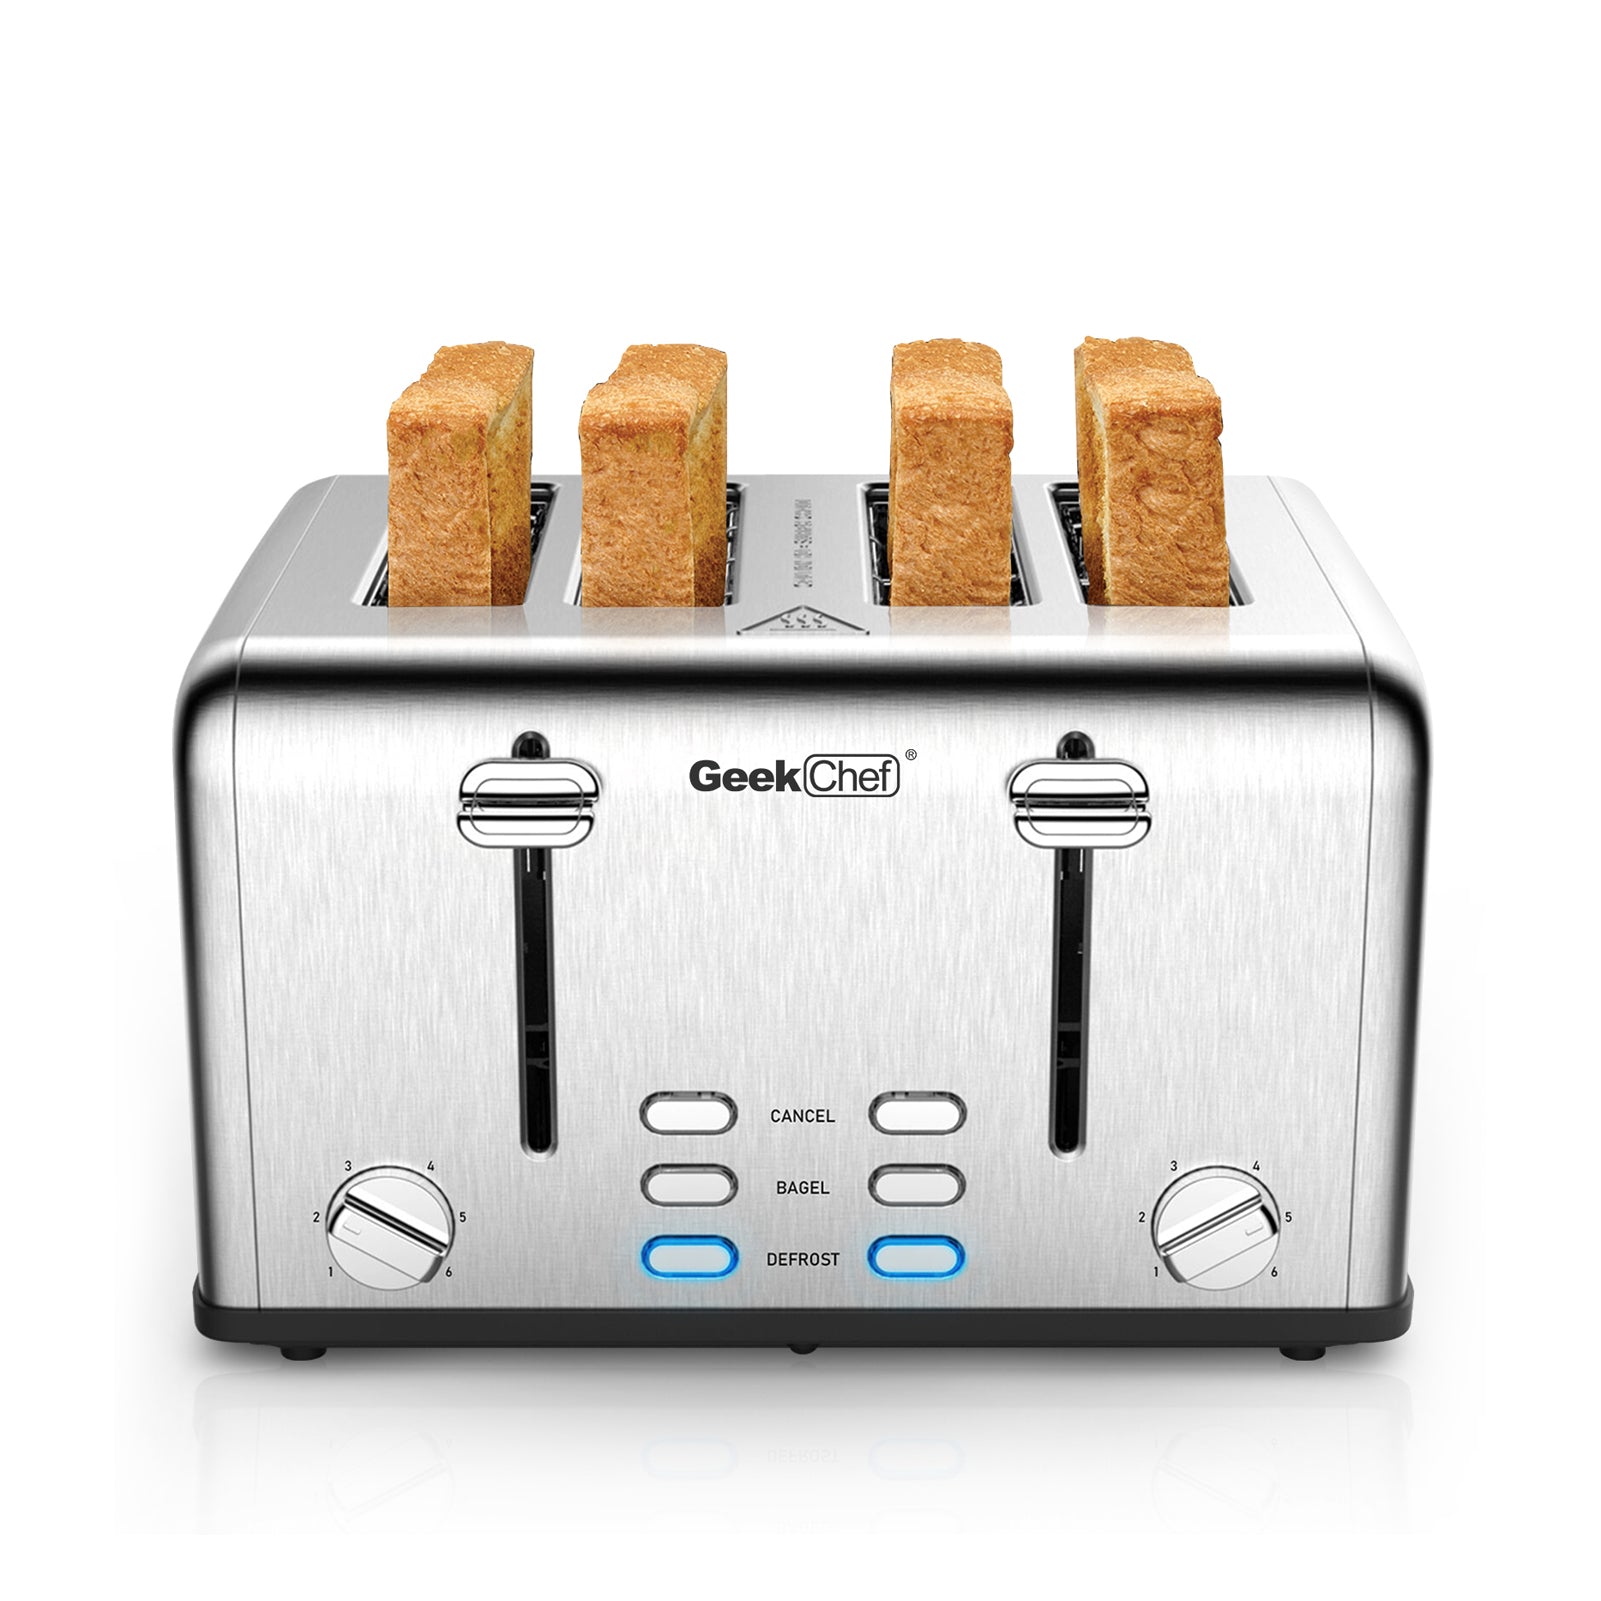 Caso Design - Four Slice Wide Slot Toaster - Stainless Steel